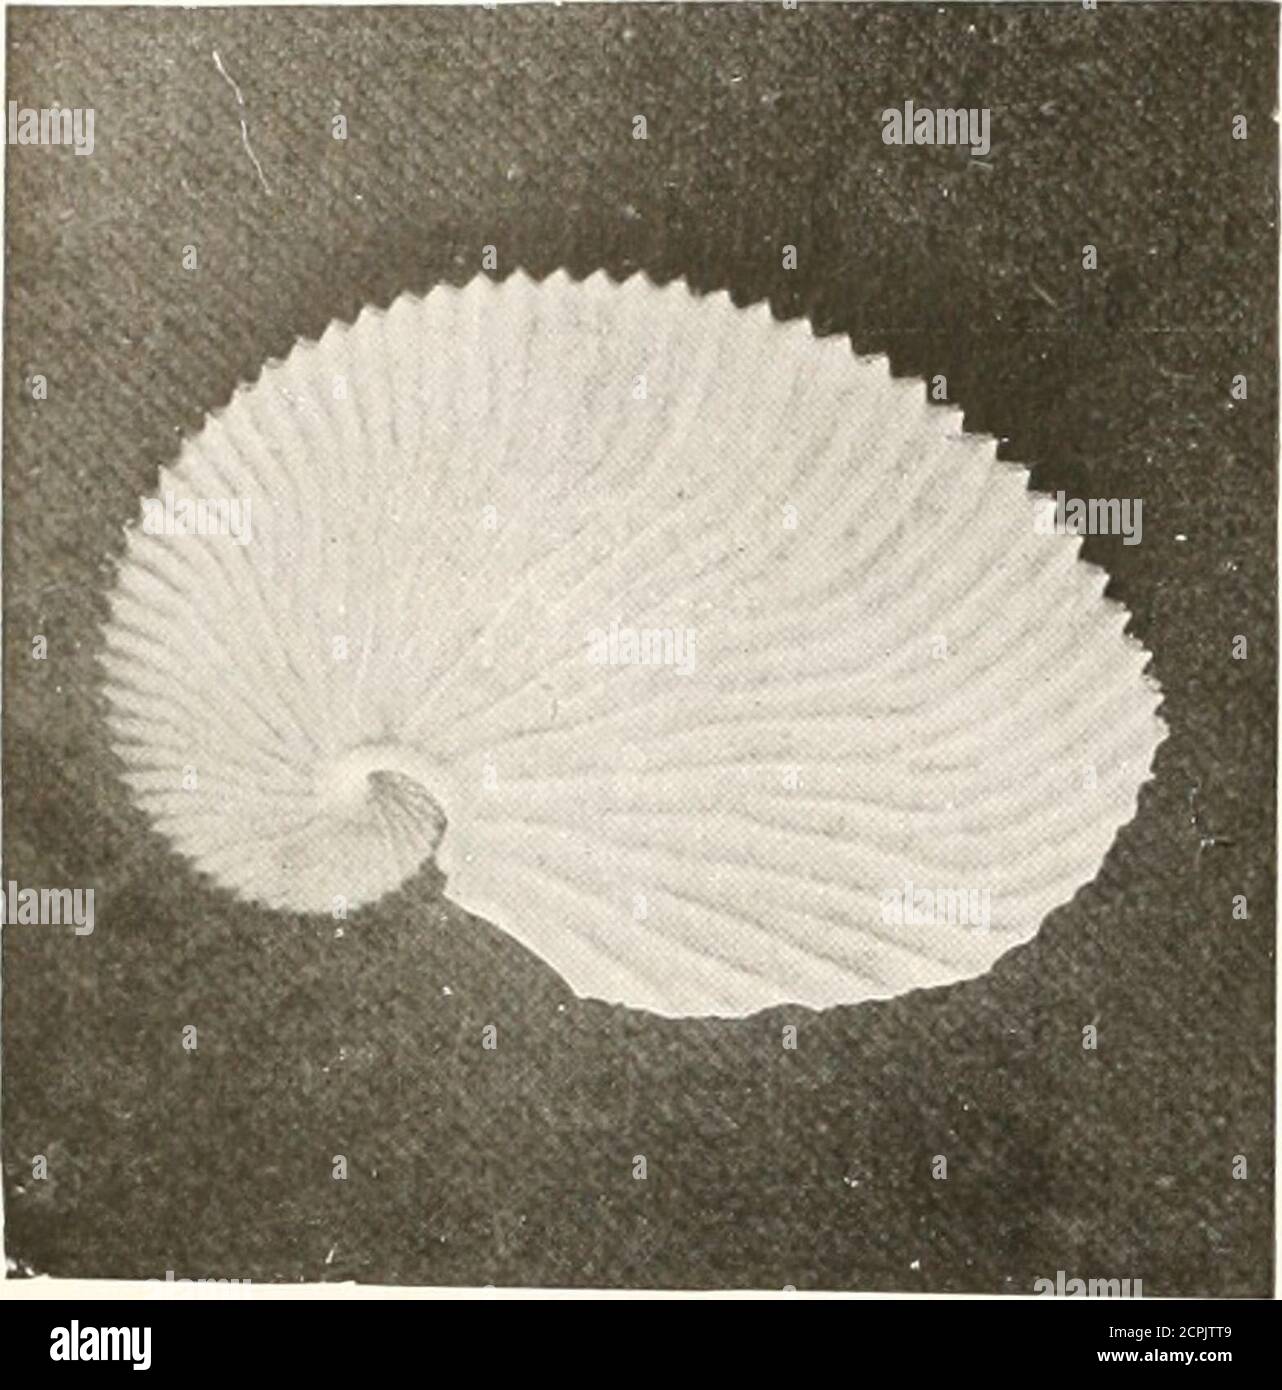 . Birds of other lands, reptiles, fishes, jointed animals and lower forms; . Phoio »&gt; II. S^v,II,-Ktn&lt;, F ZA. SHELL OF THE PEARLY NAUTILUS The inner lining of this shtil is briliianily iridescent 34. THE LIVING ANIMALS OF THE WORLD. Phtila by ly, Sa^illi-Kinl, F.Z.S. SHELL OF THE ARGONAUT, ORPAPER-NAUTILUS The female animal only poiseises a shelly and uses it as a cradleJor her eggs an J young usiiall} retracted within special pouches wliennot in use, can be shot out to a length atleast twice that of the eight ordinary arms.Hcith the cuttle-fish and the squid, or cala-inar}-, are also th Stock Photo